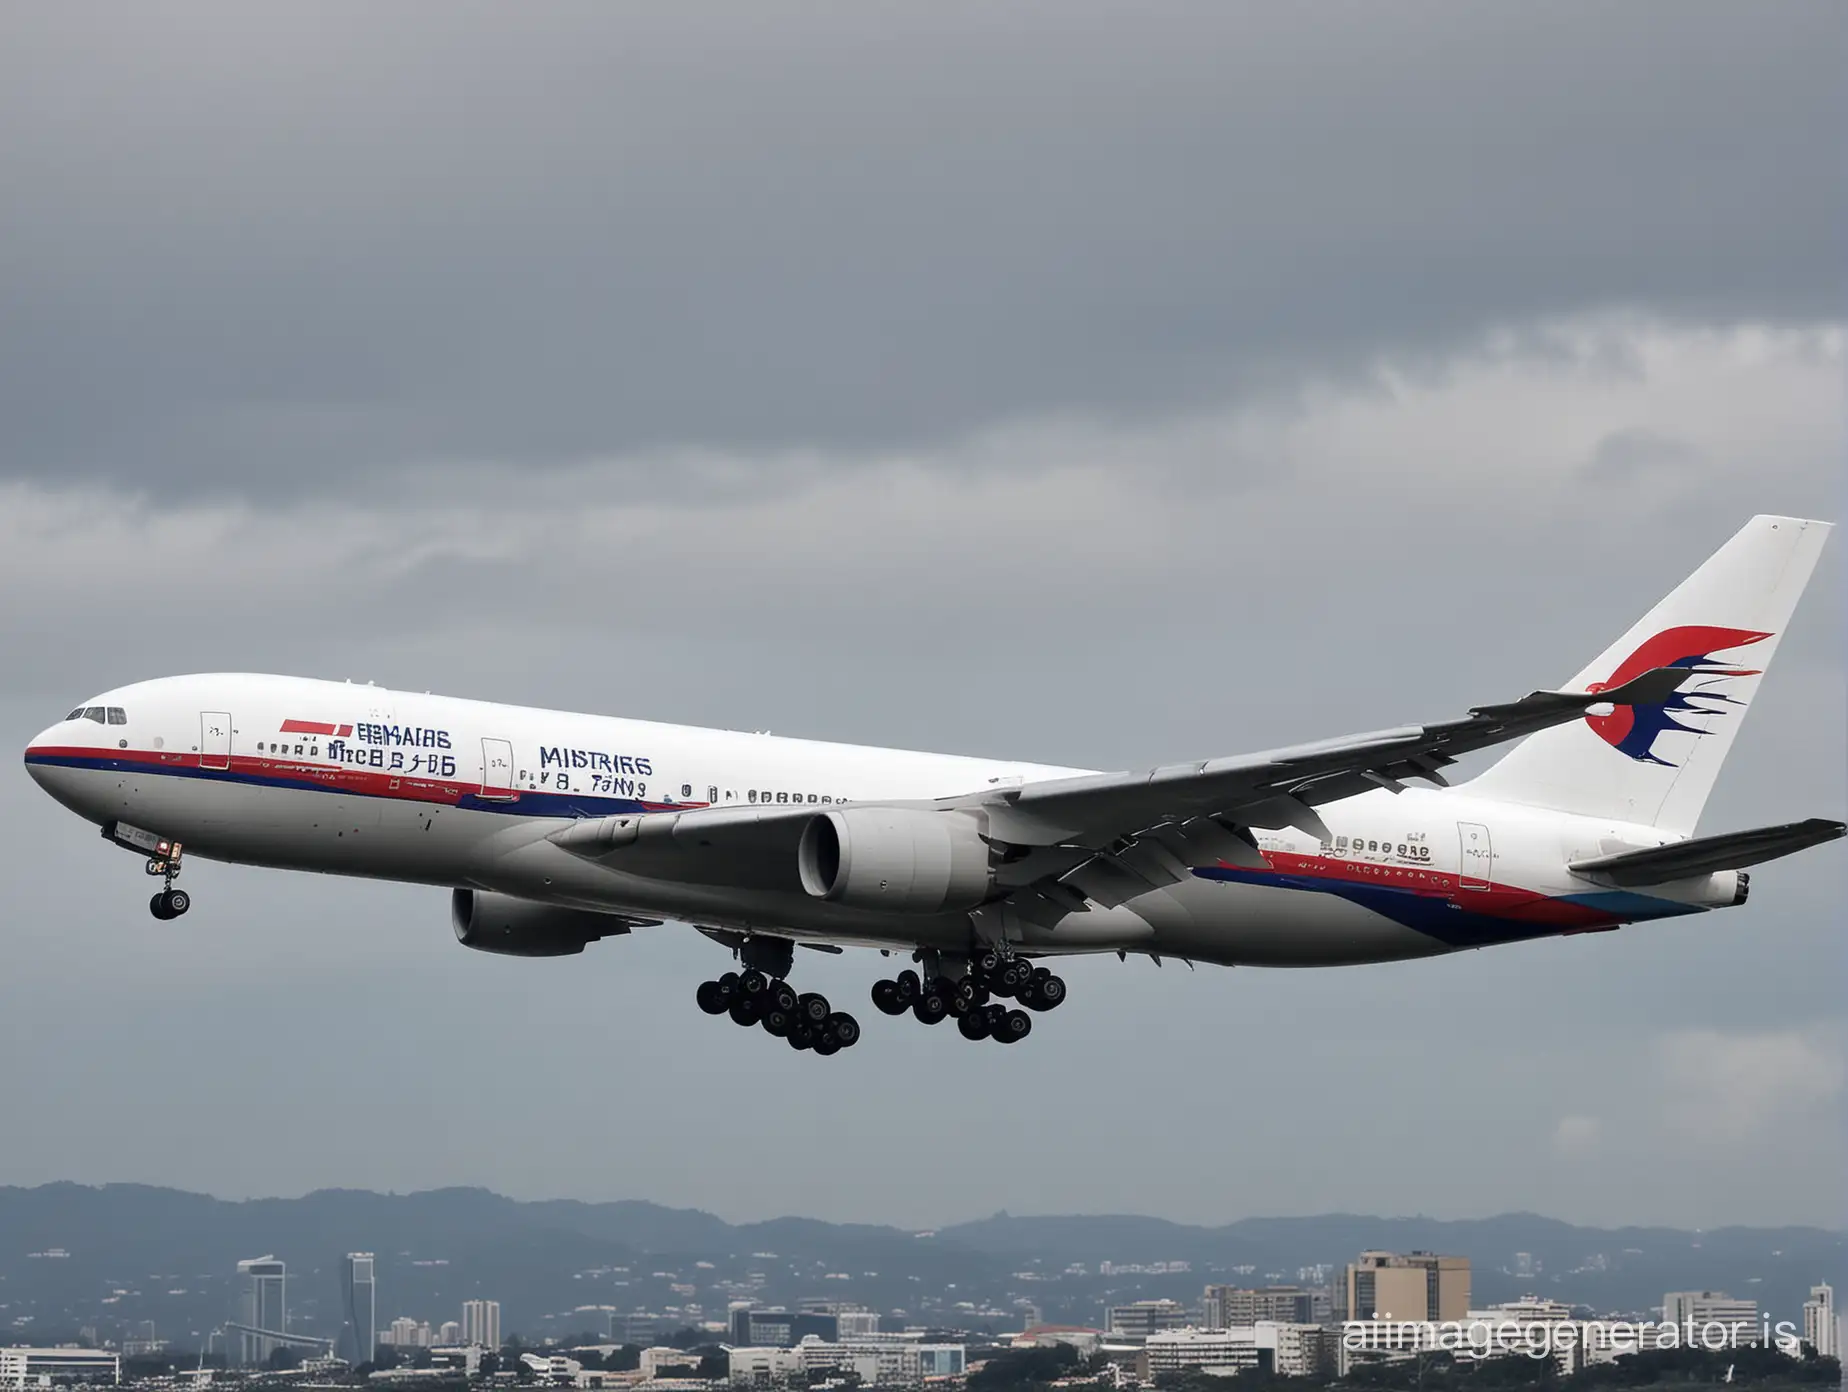 one of the most baffling mysteries of modern aviation: the disappearance of Malaysia Airlines Flight MH370.